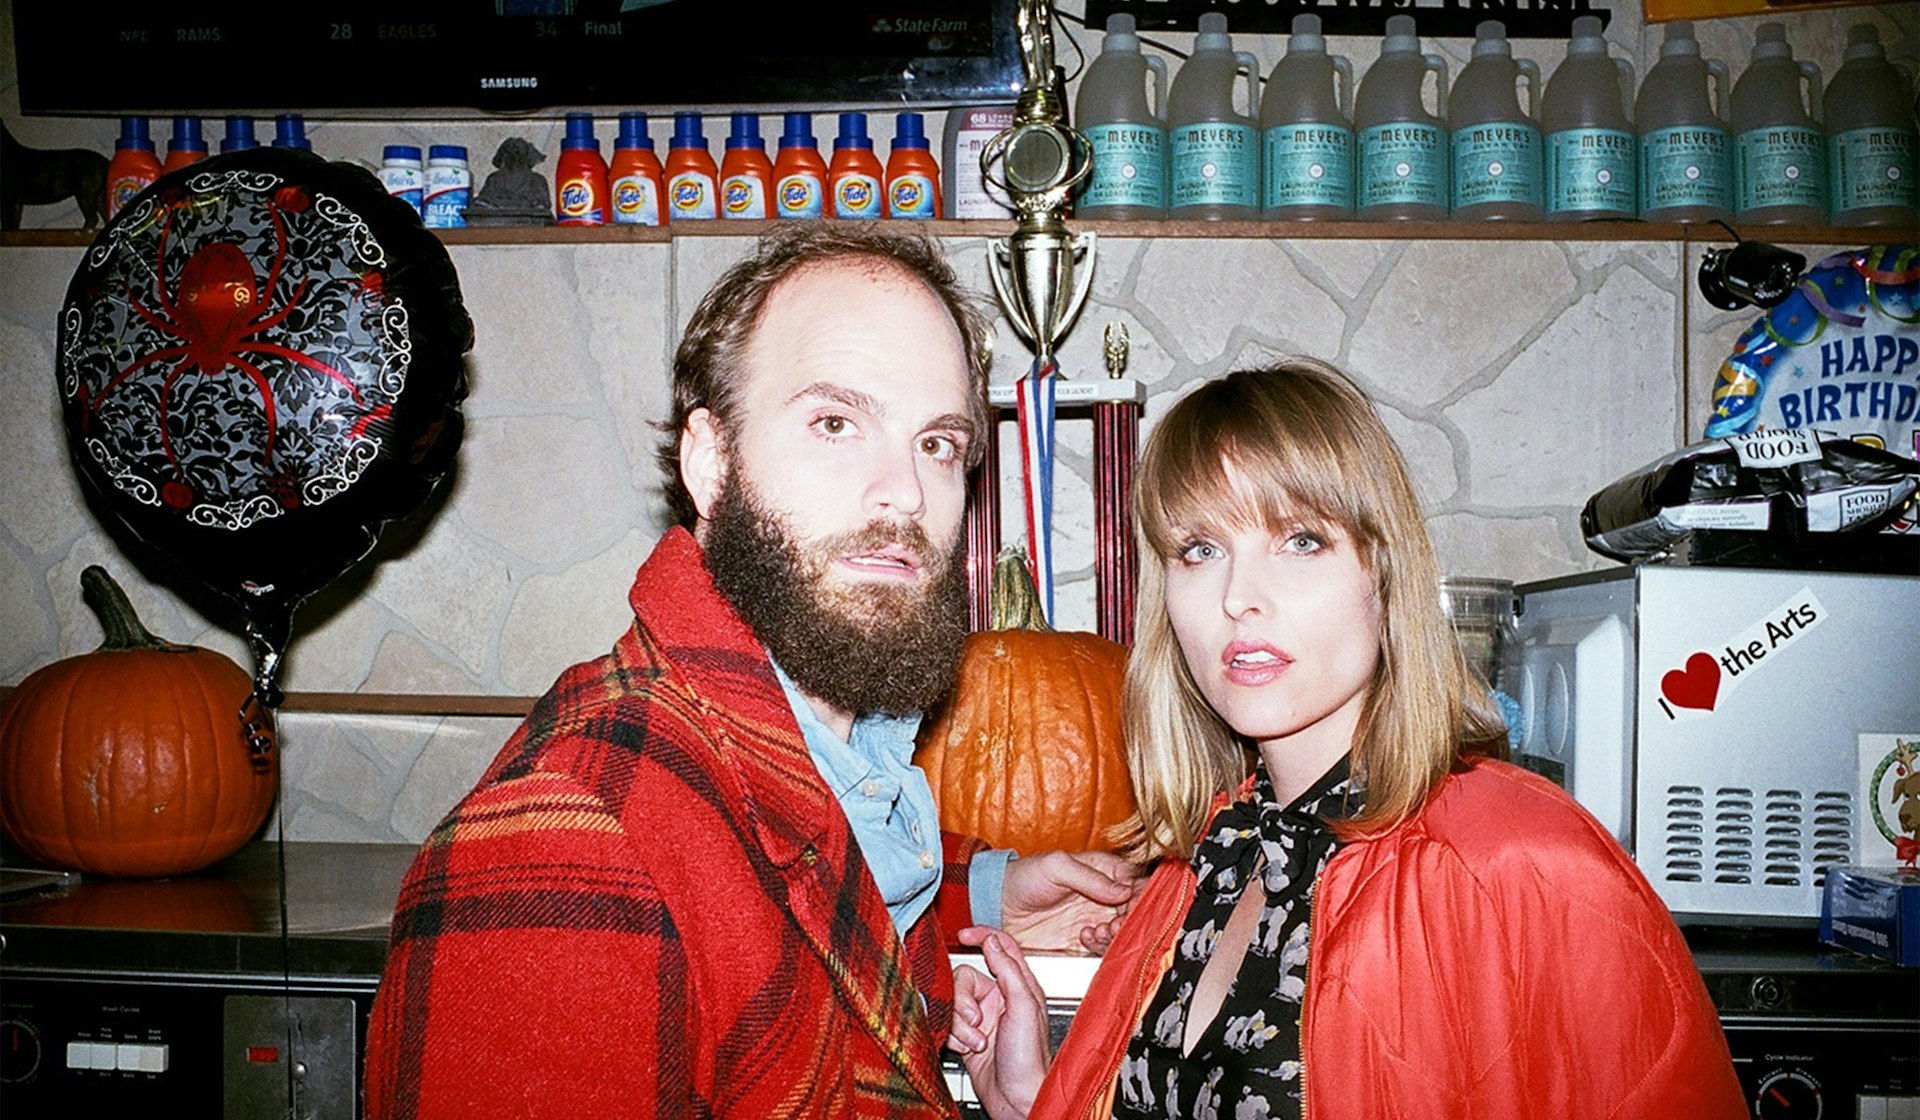 High Maintenance creators bucked the system by trusting the wisdom of their gut